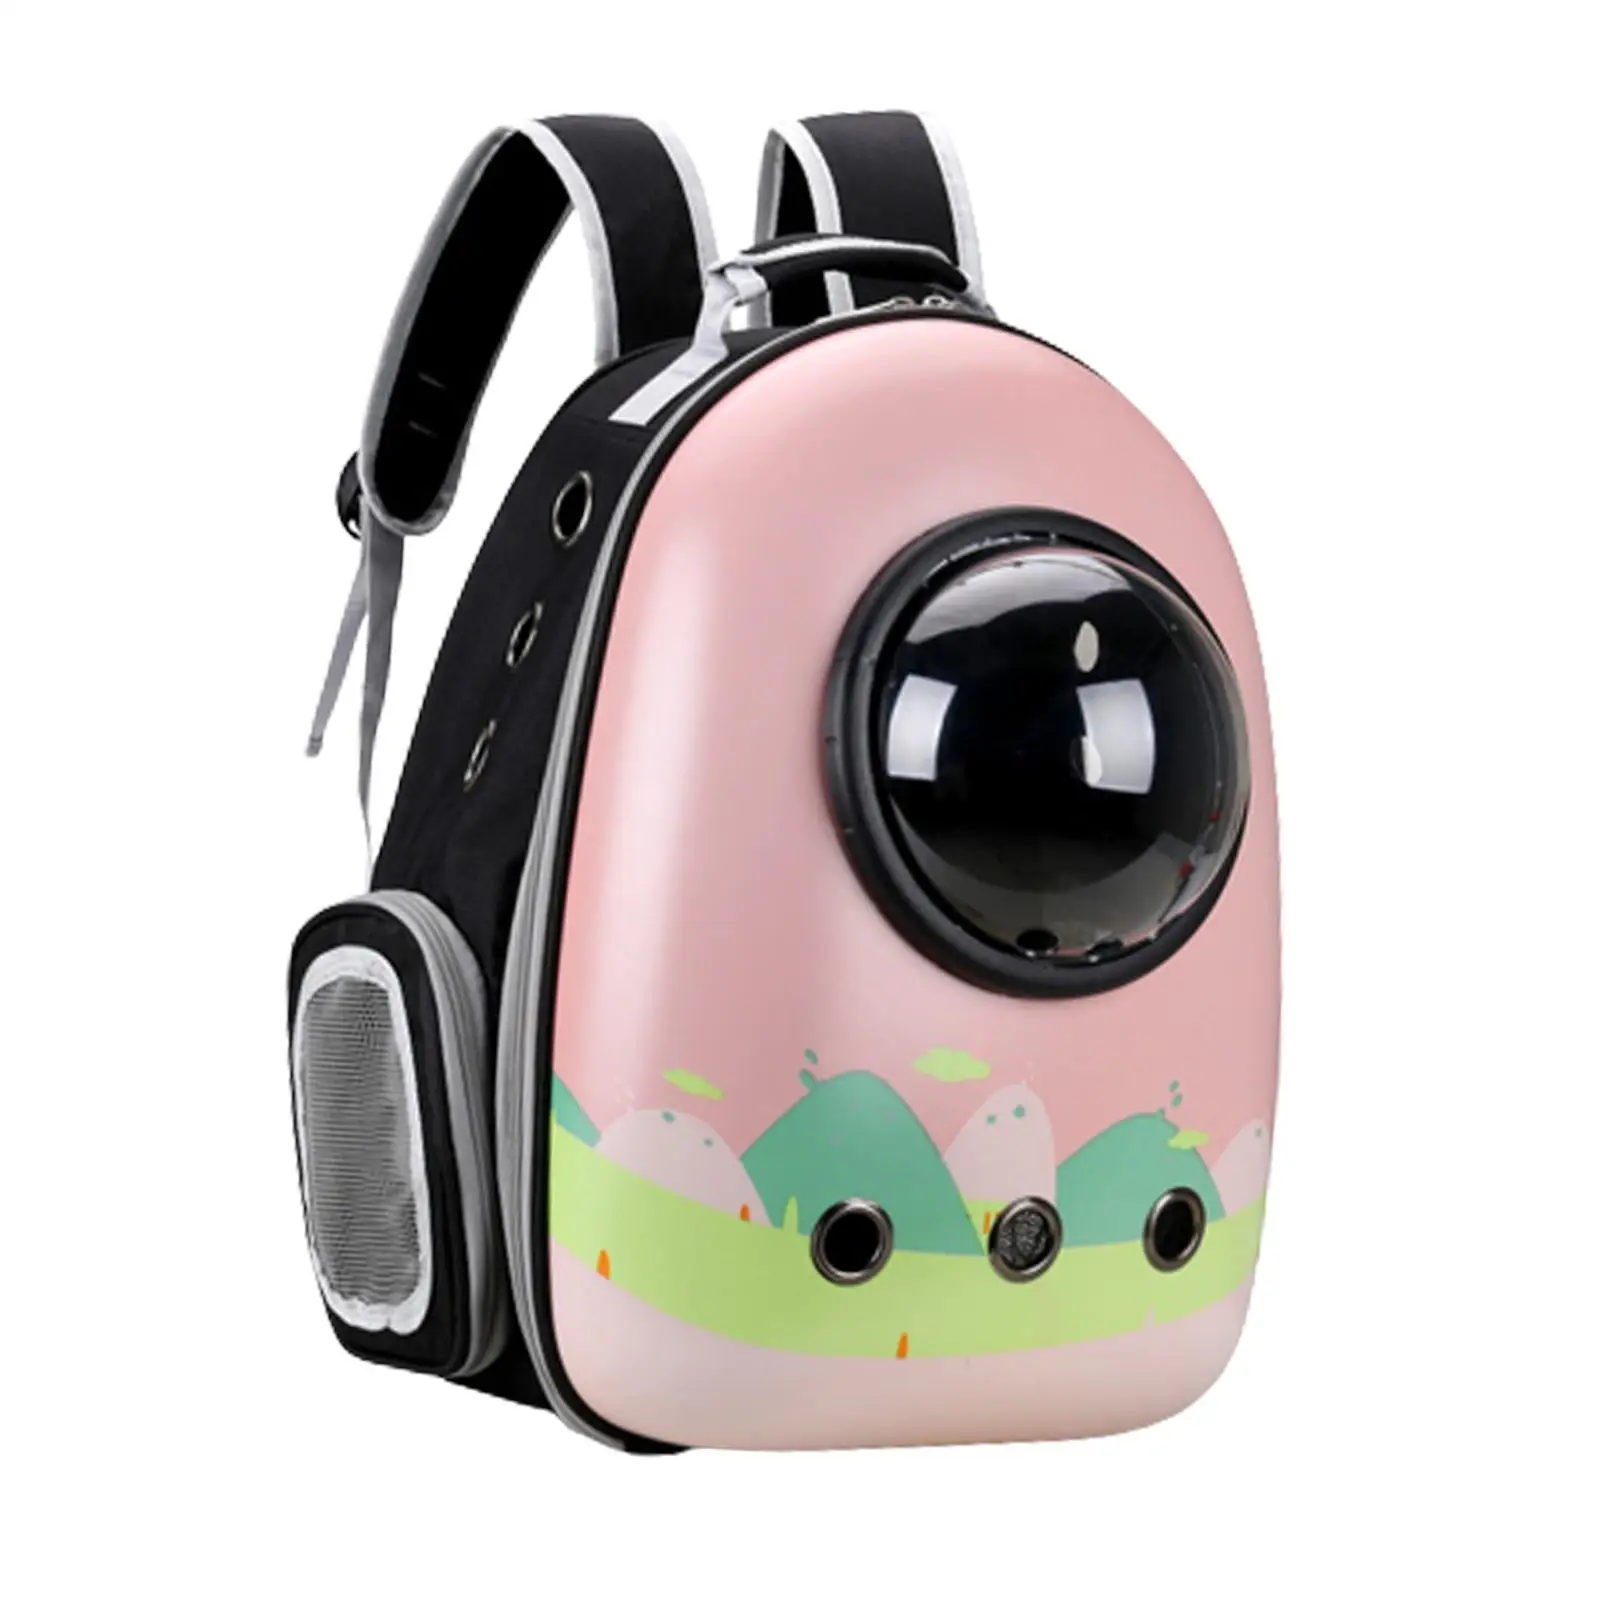 Cat Carrier Backpack Carrying Bag Ventilation Portable Small Dogs Cats Travel Carrier for Outdoor Camping Travel Walking Hiking